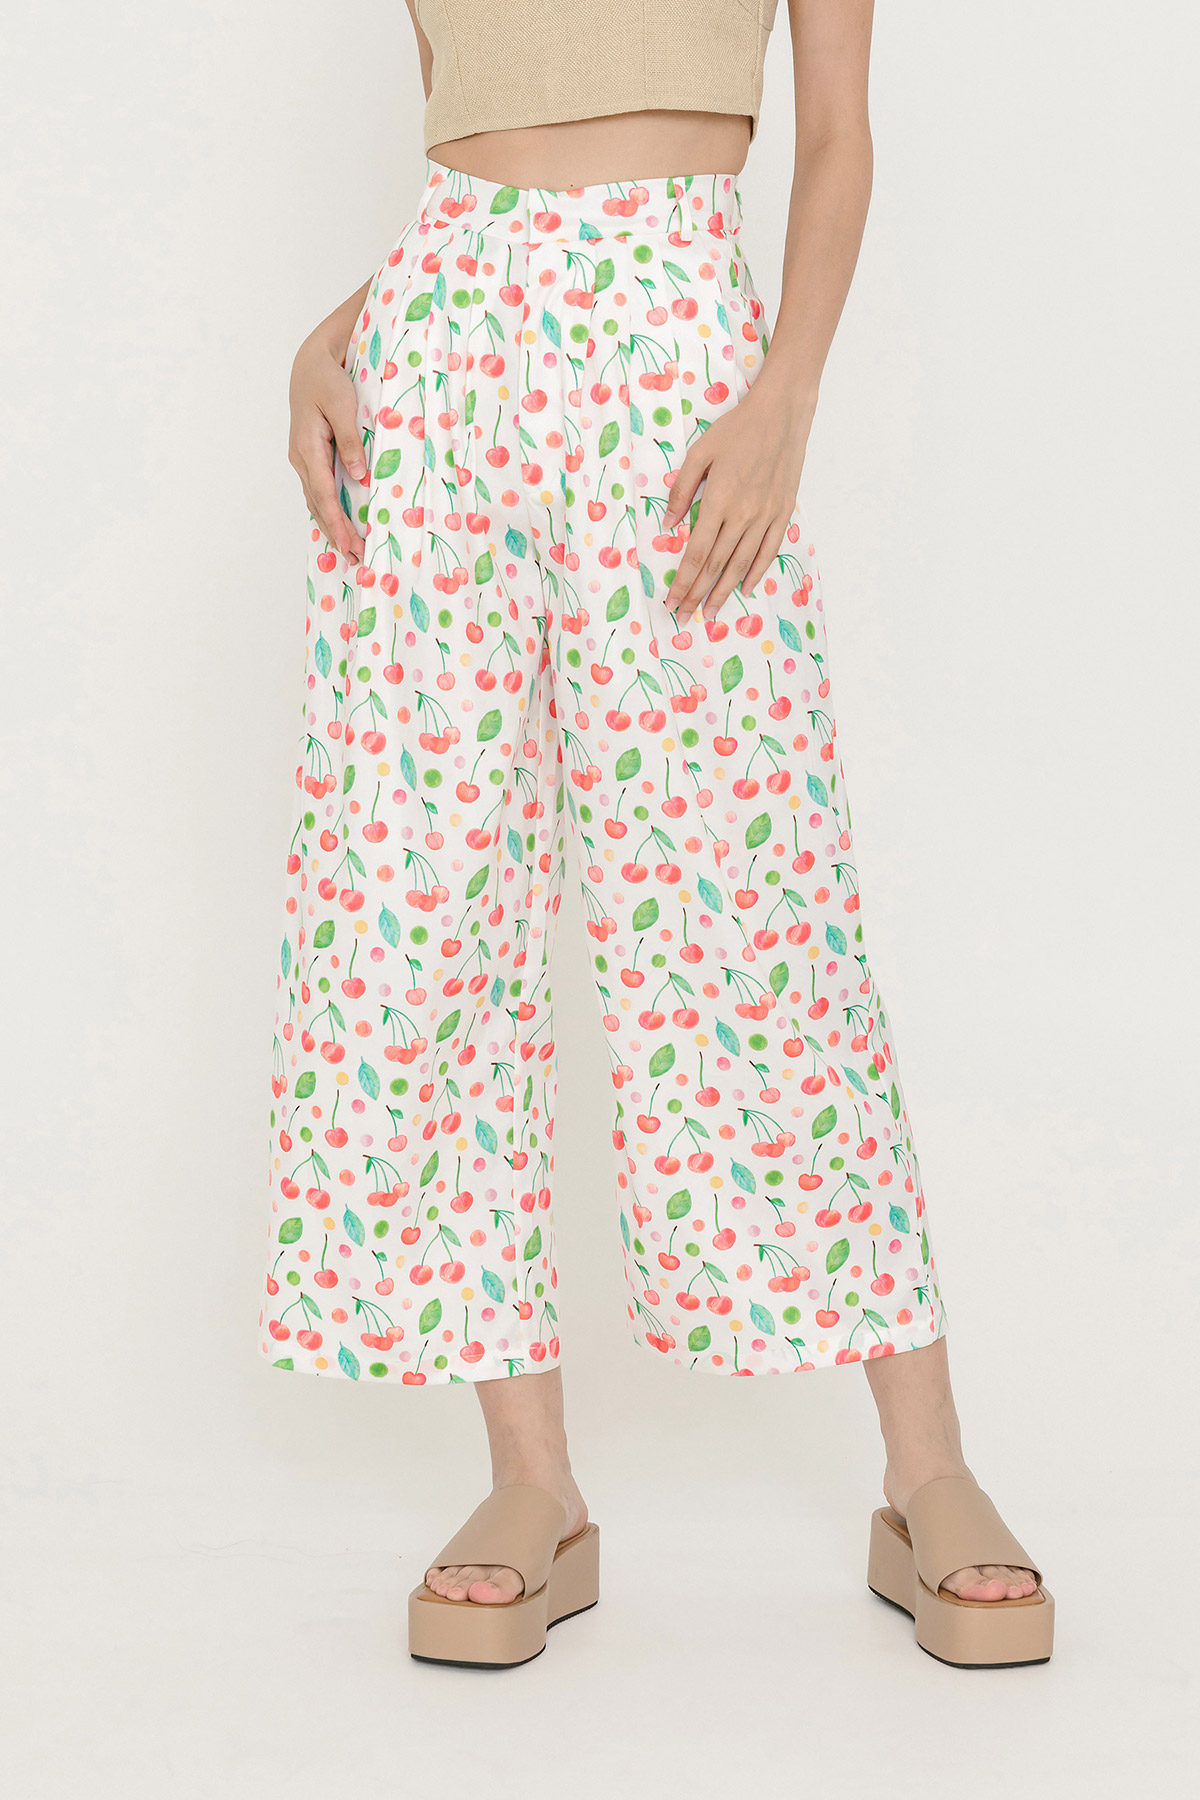 *SALE* PAIGE PANTS - CHERRY ON TOP [BY MODPARADE]